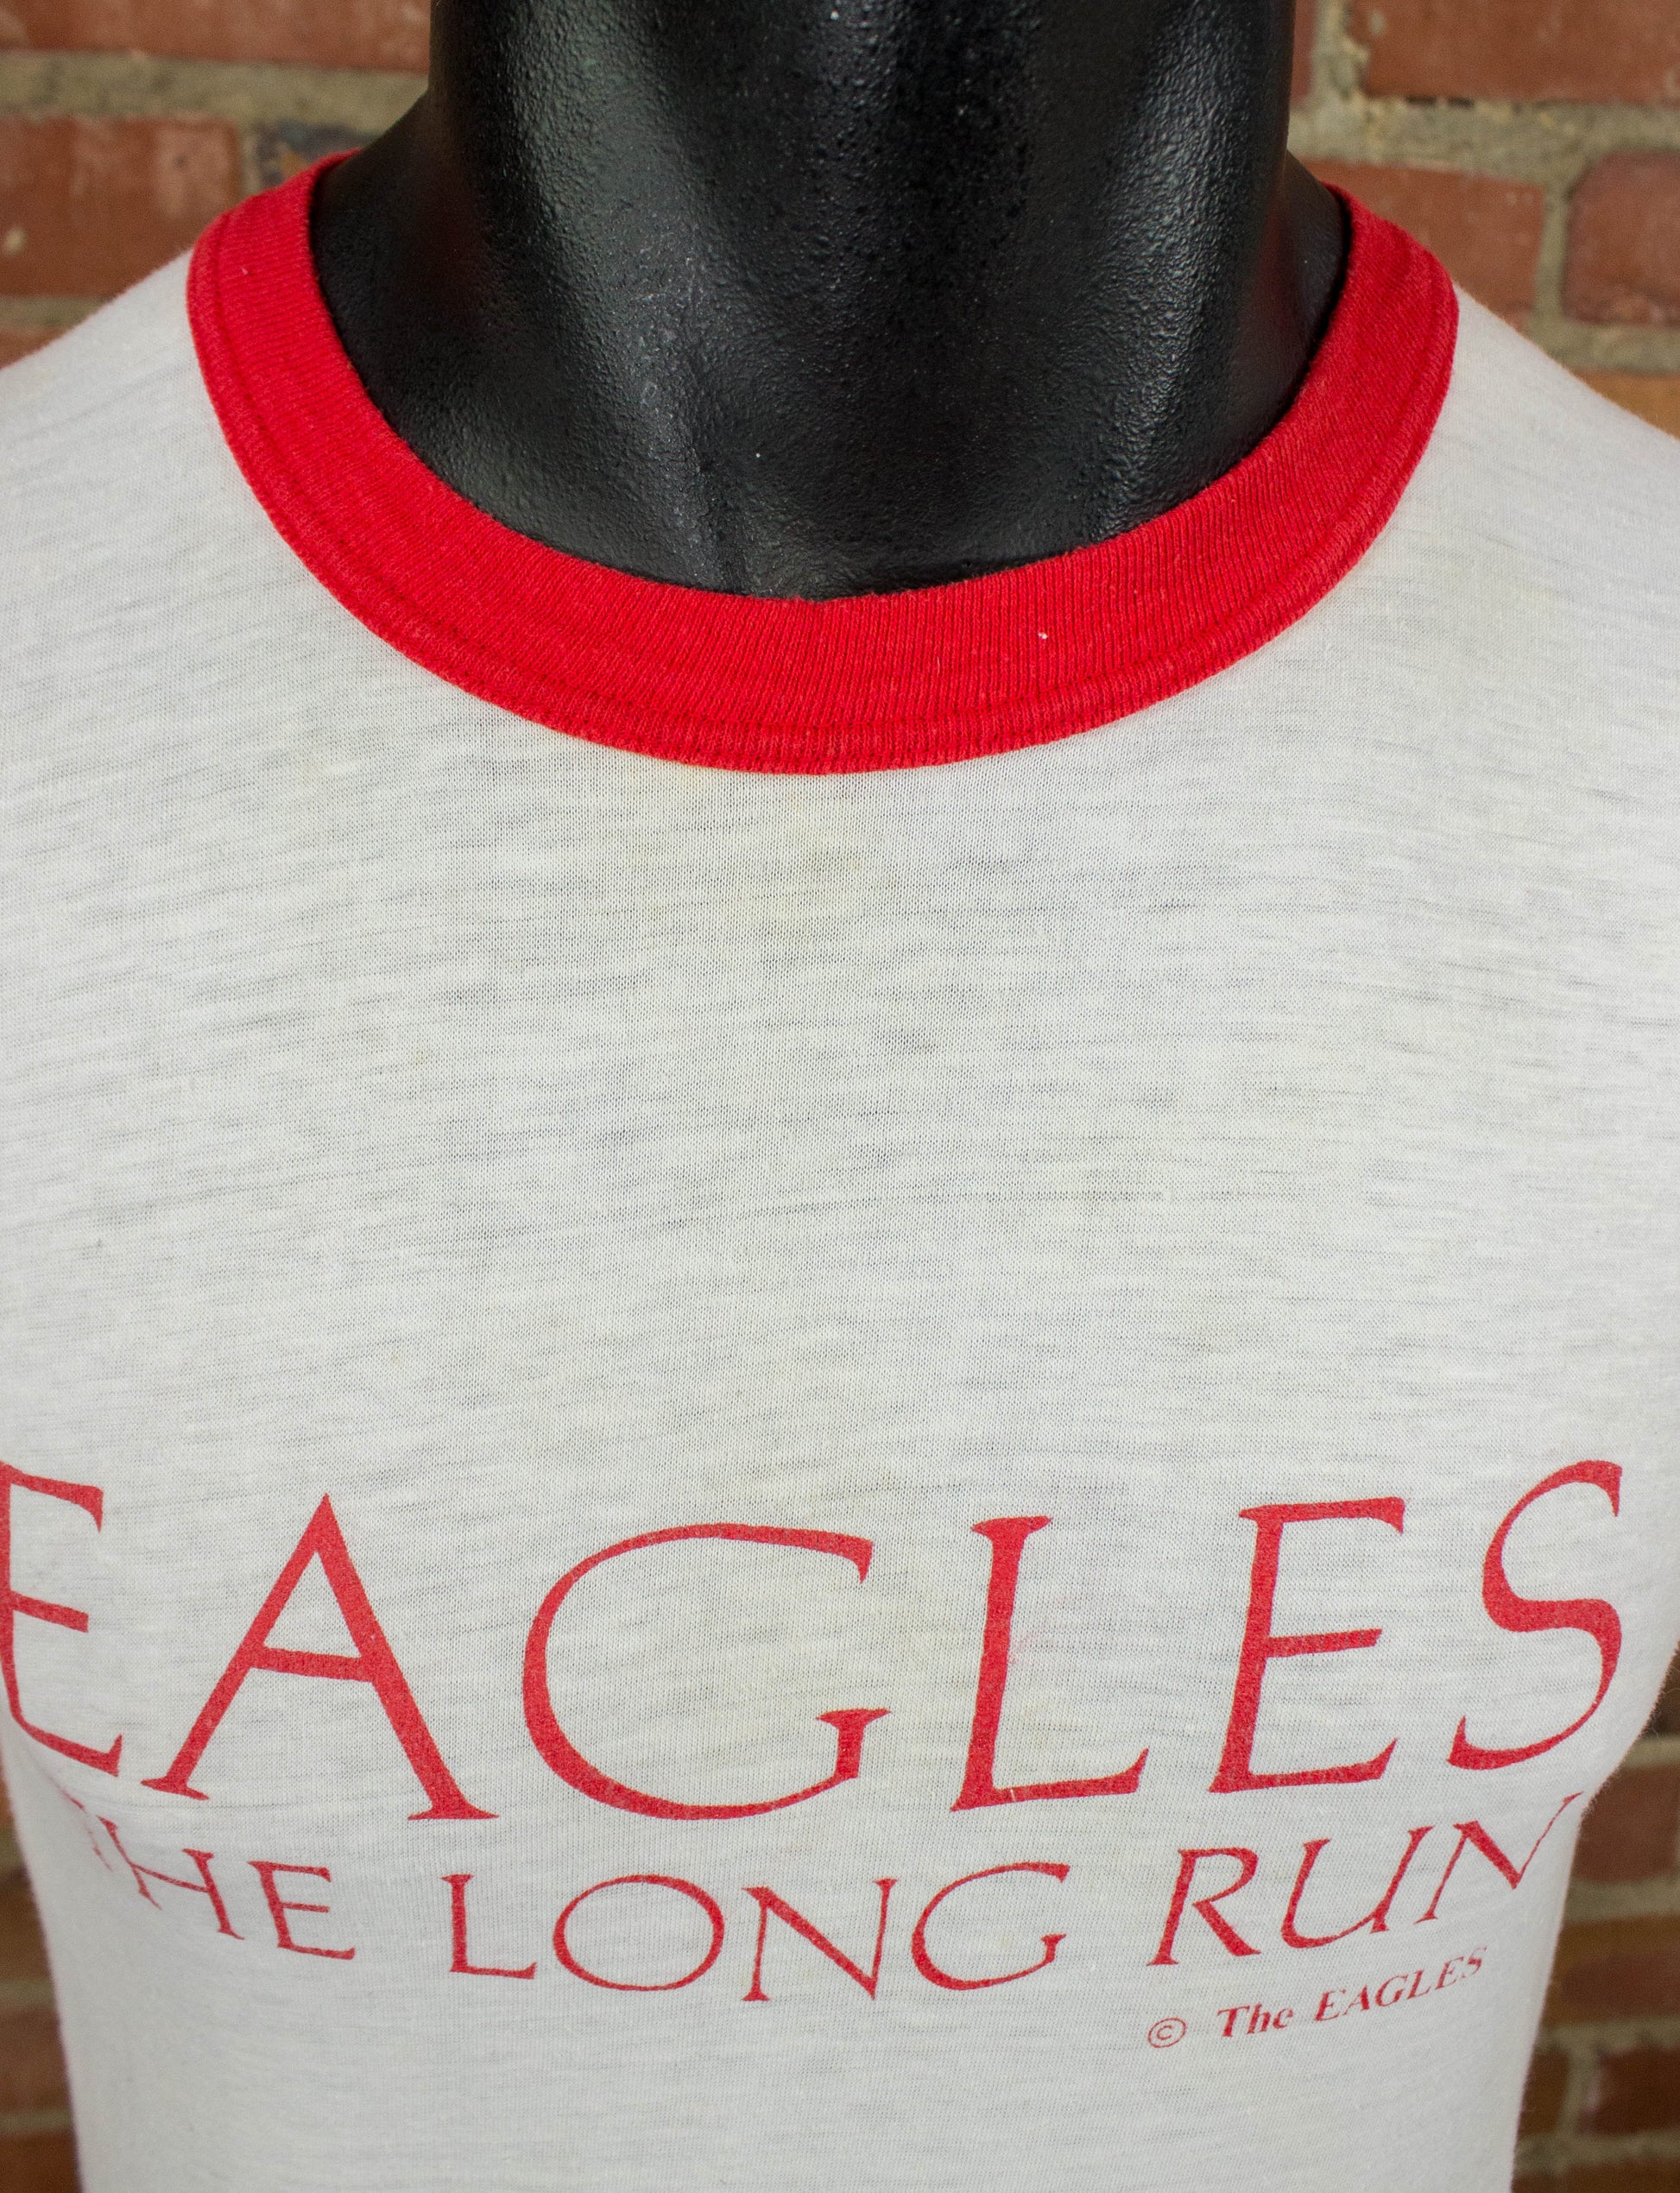 Vintage Eagles Concert T Shirt 1980 The Long Run Tour Red and White Small